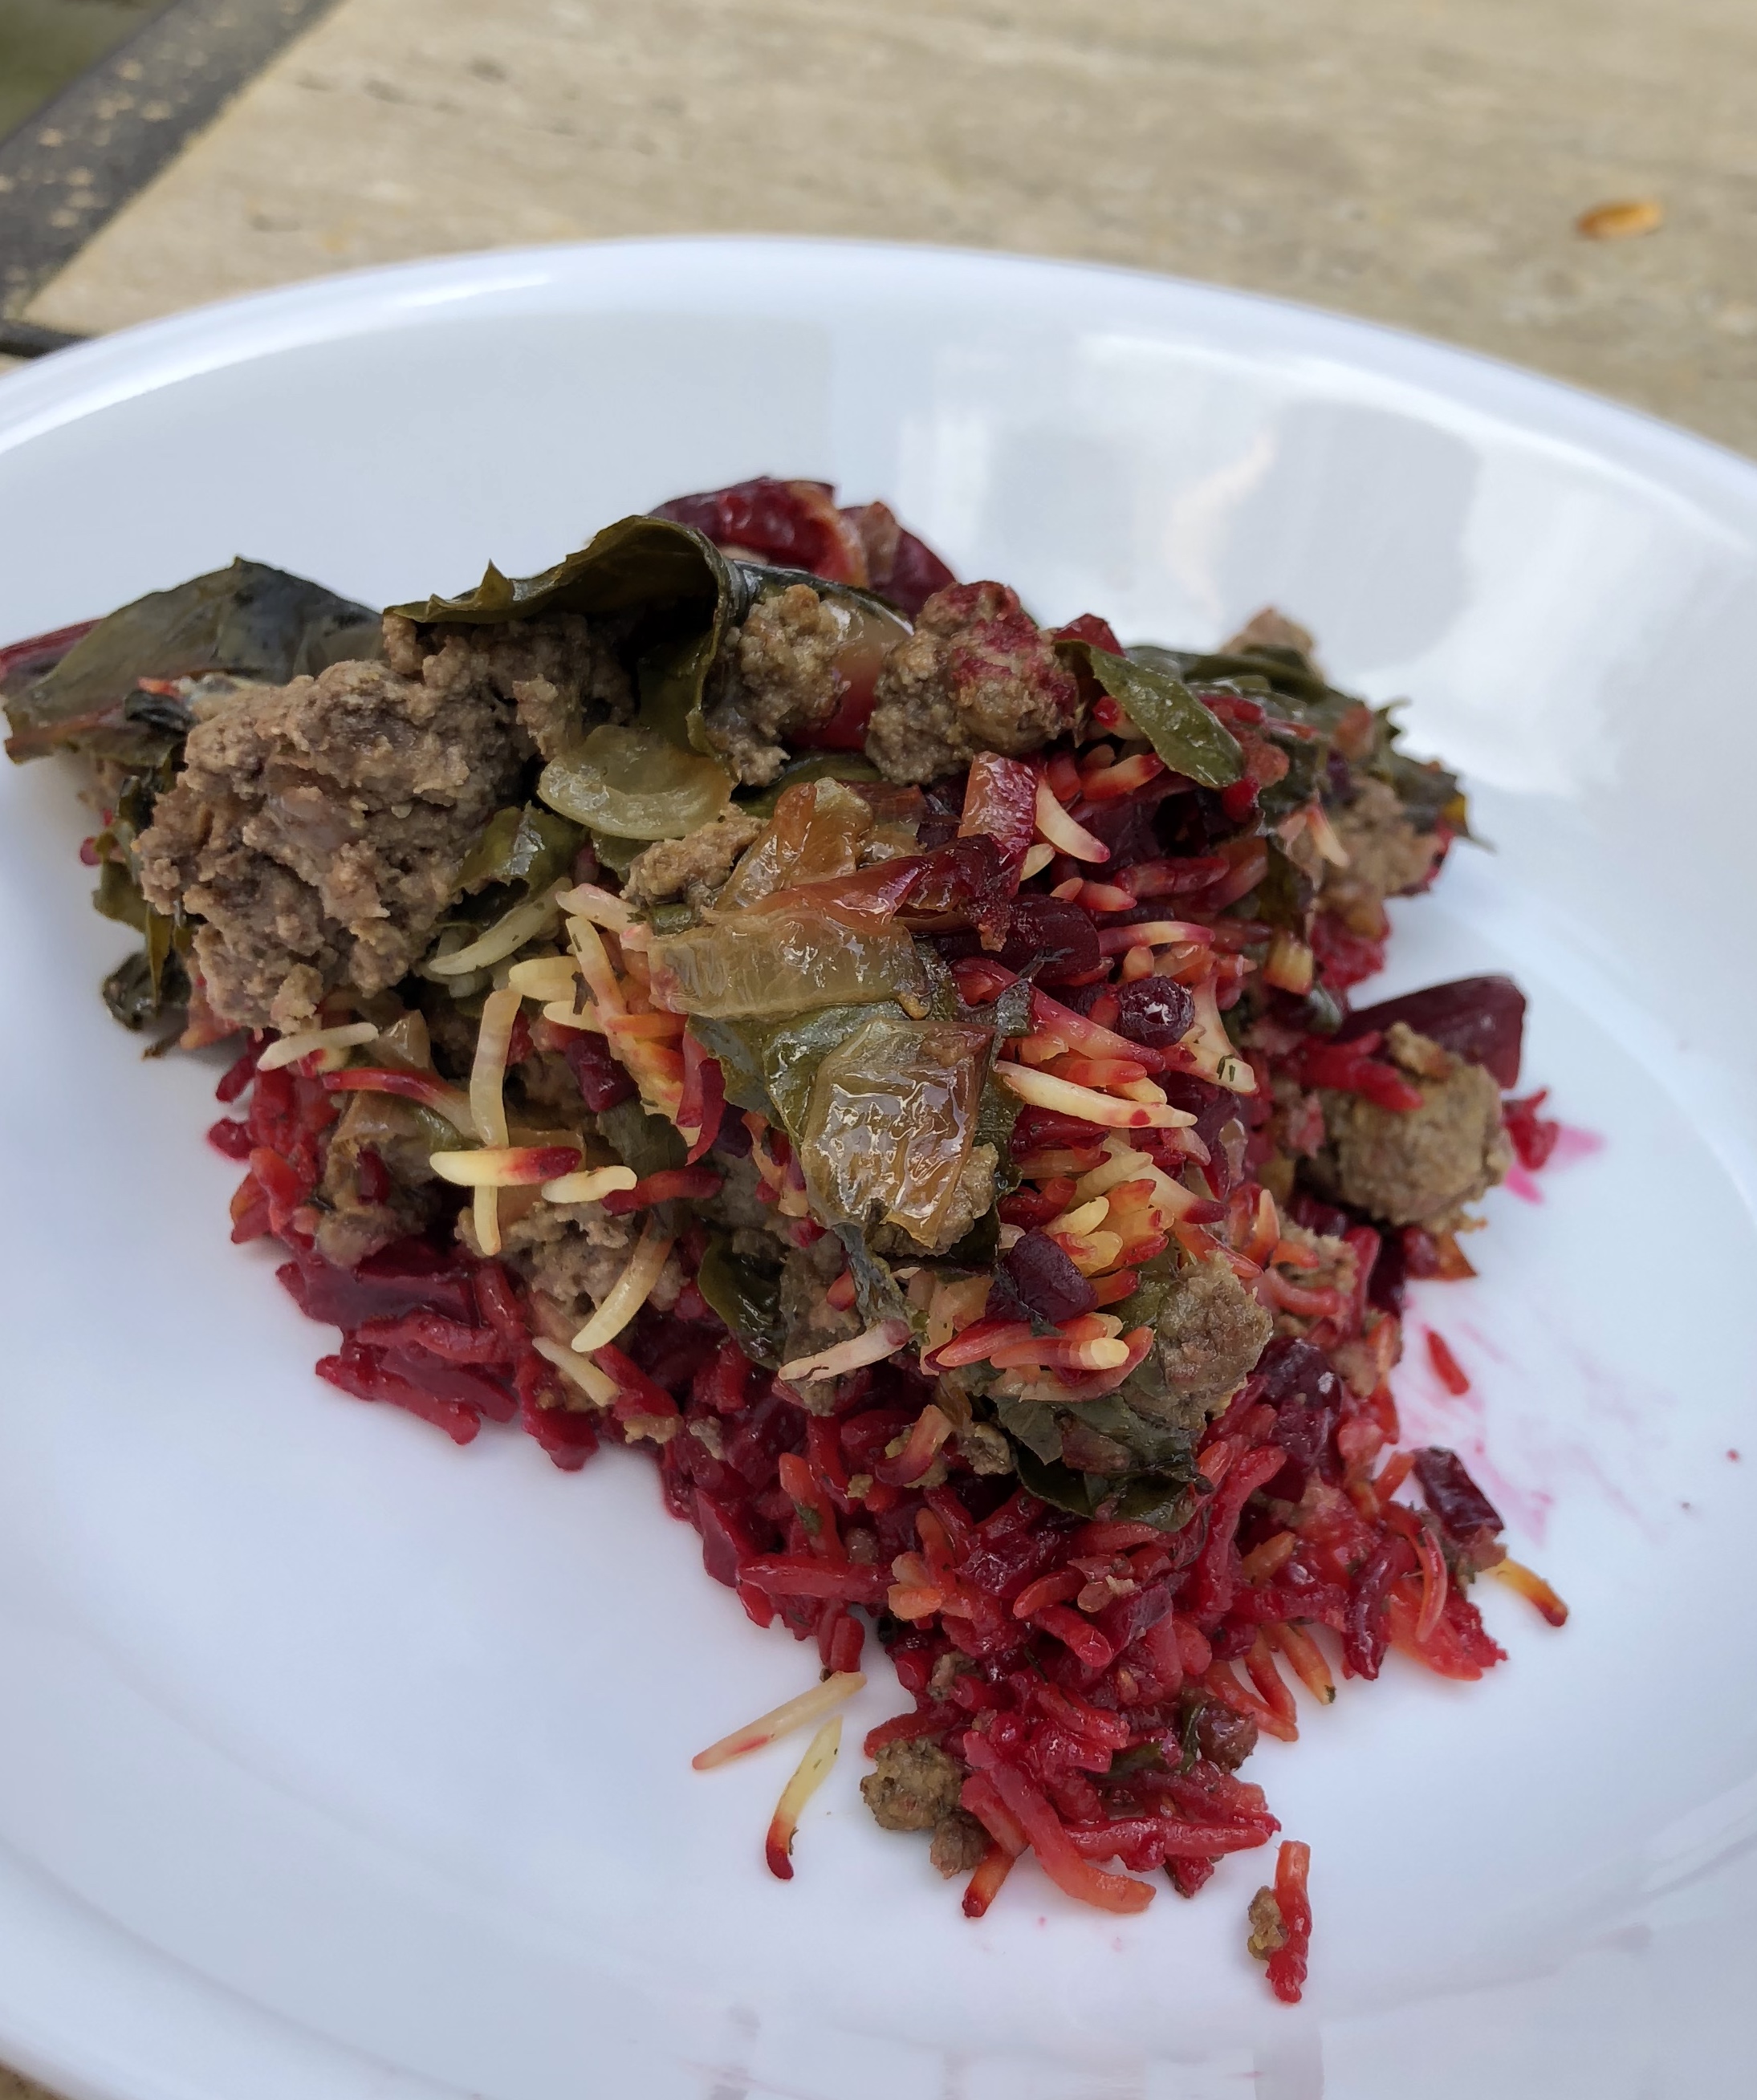 Rosh Hashanah Pilaf with Beets, Chard, and Beef from Iraqi Kurdistan